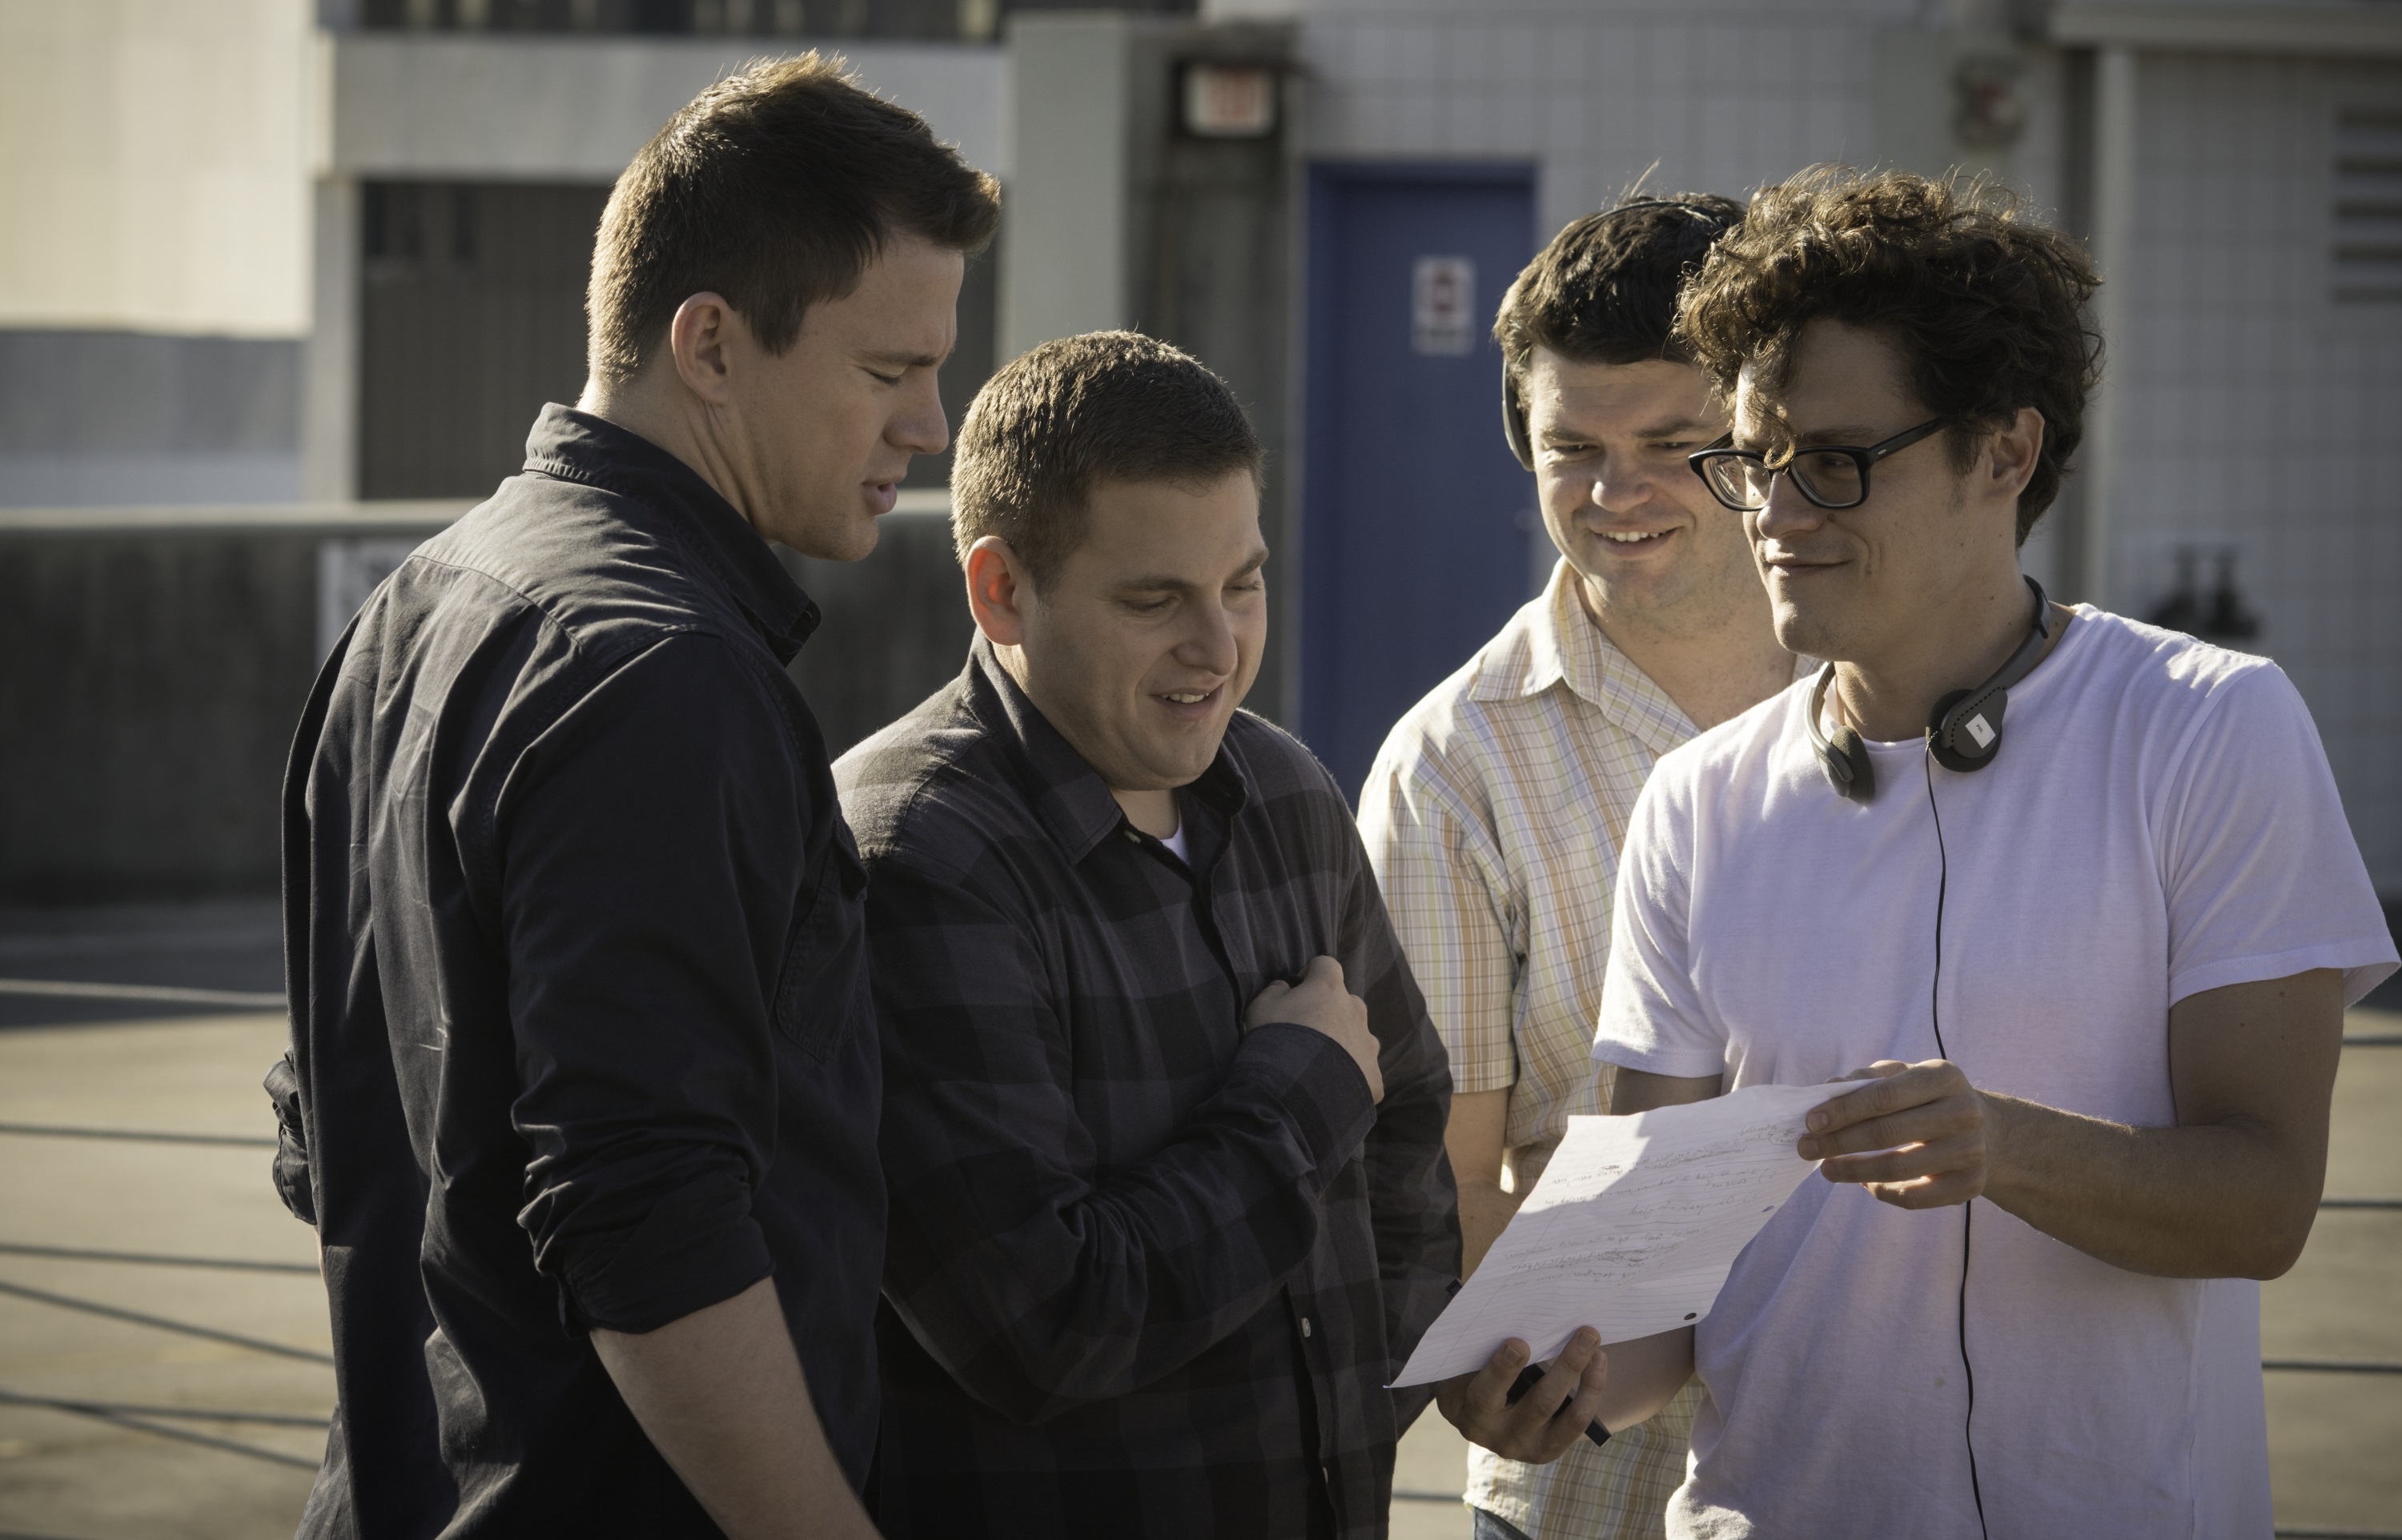 BTS/ Directors PHIL LORD and CHRIS MILLER rehearse with Hill/Tatum